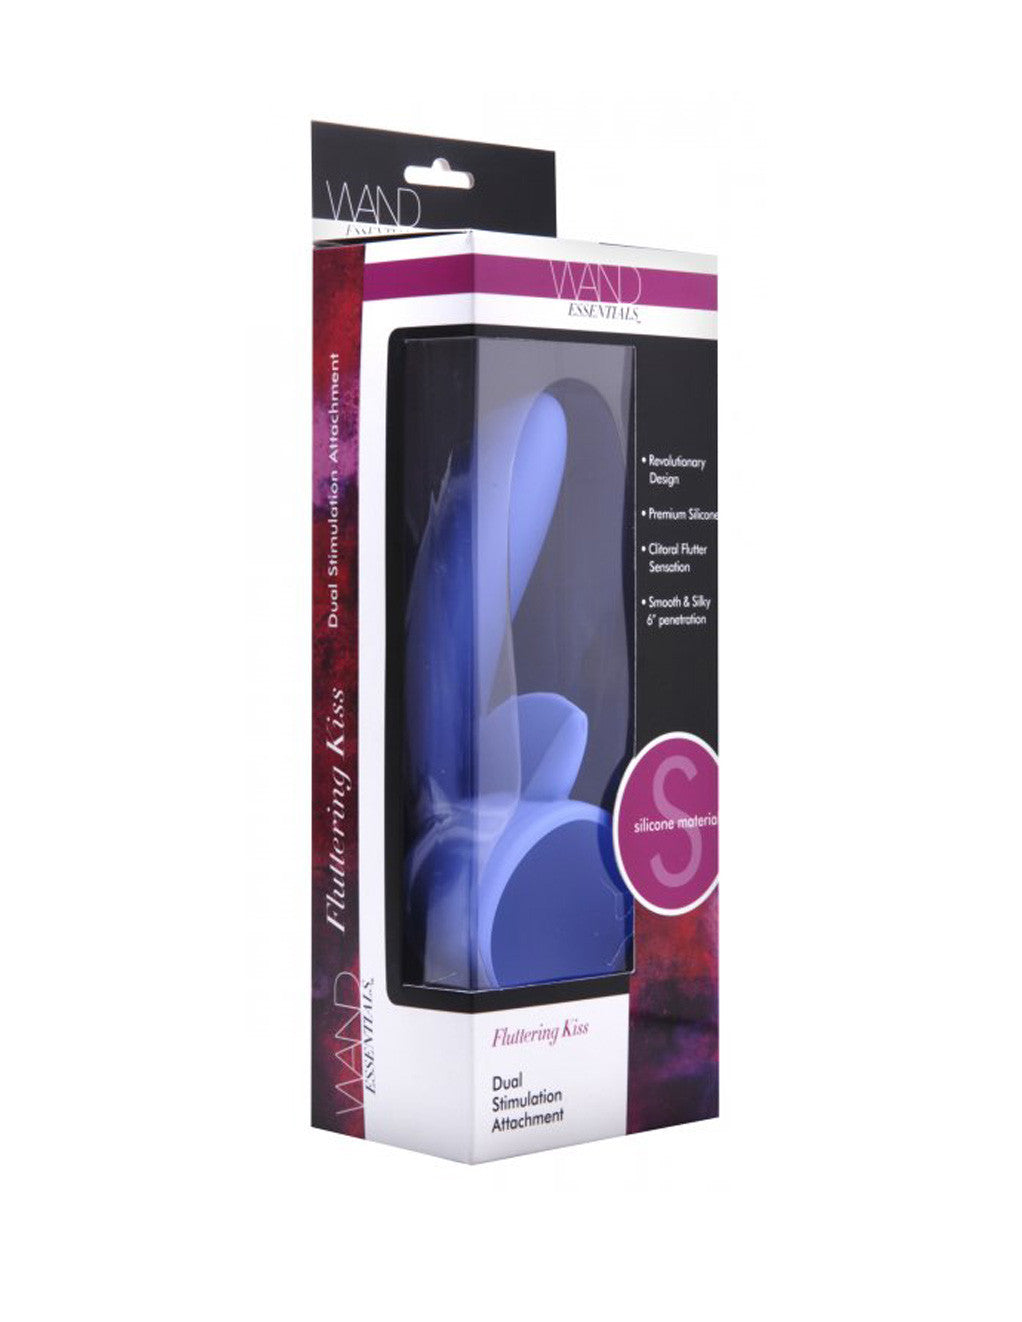 Wand Essentials Fluttering Kiss Dual Stimulation Wand Attachment Package